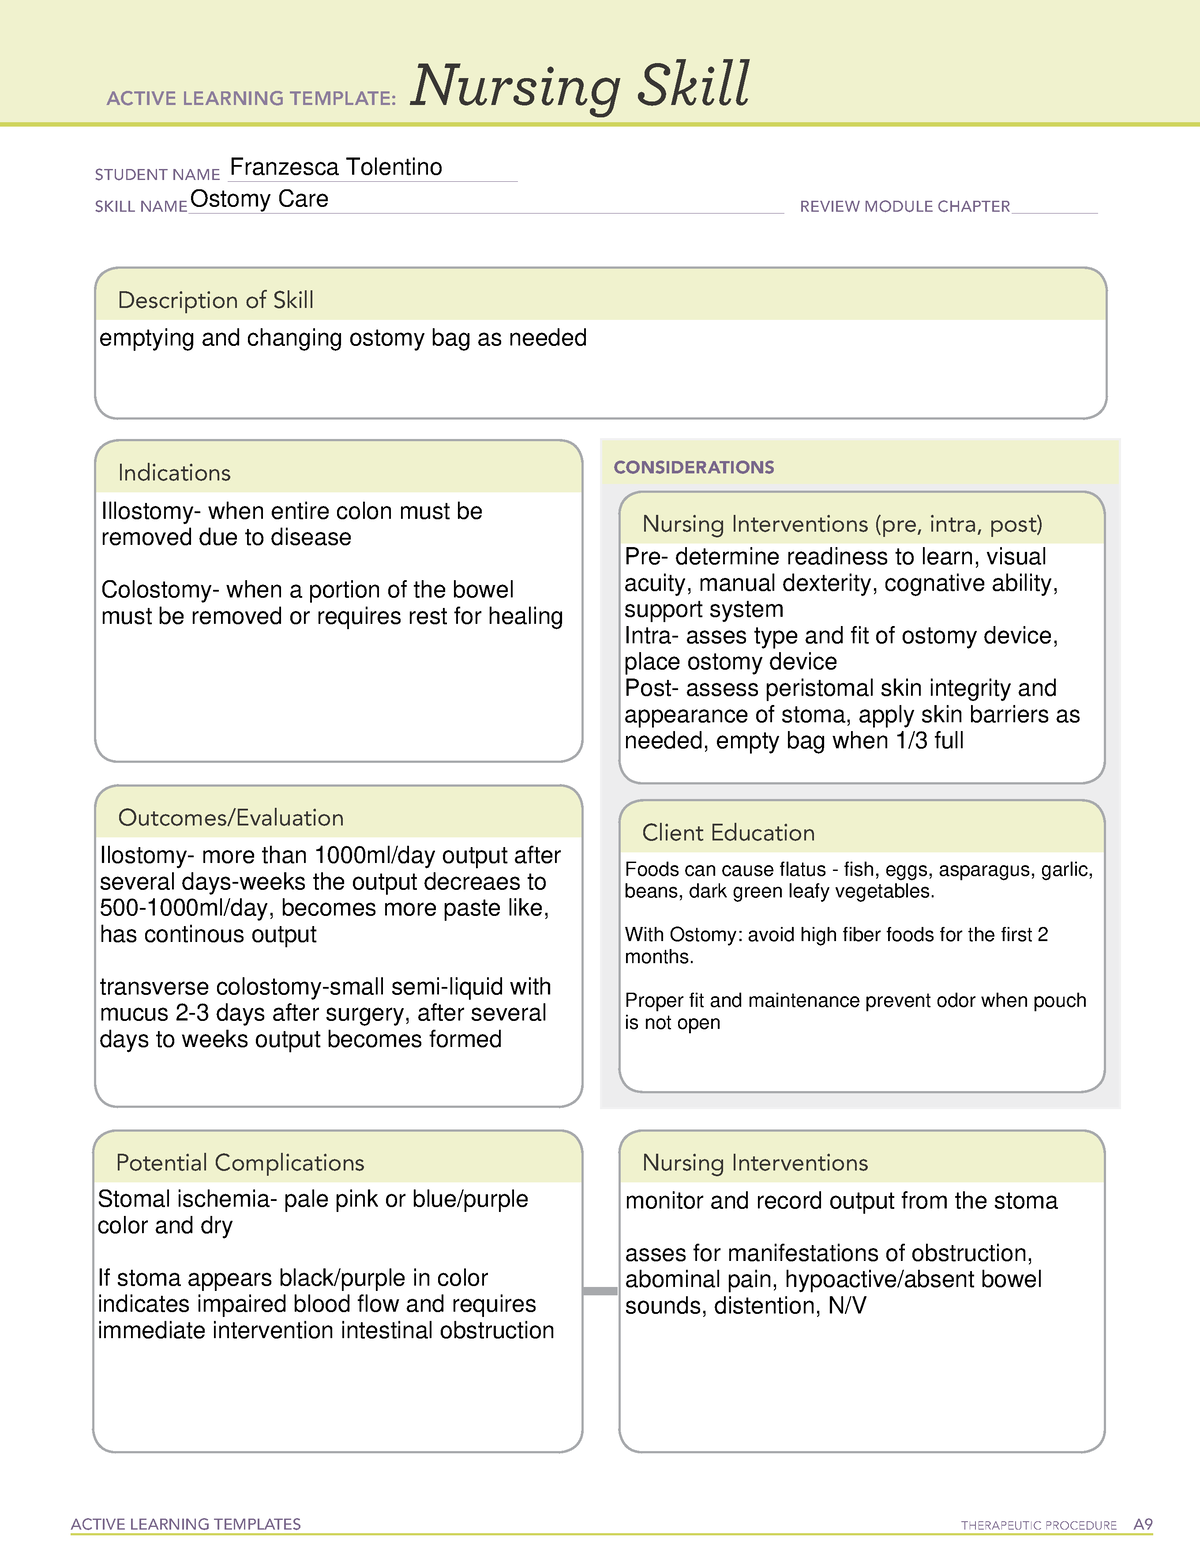 Active Learning Template Nursing Skill form Ostomy CARE ACTIVE